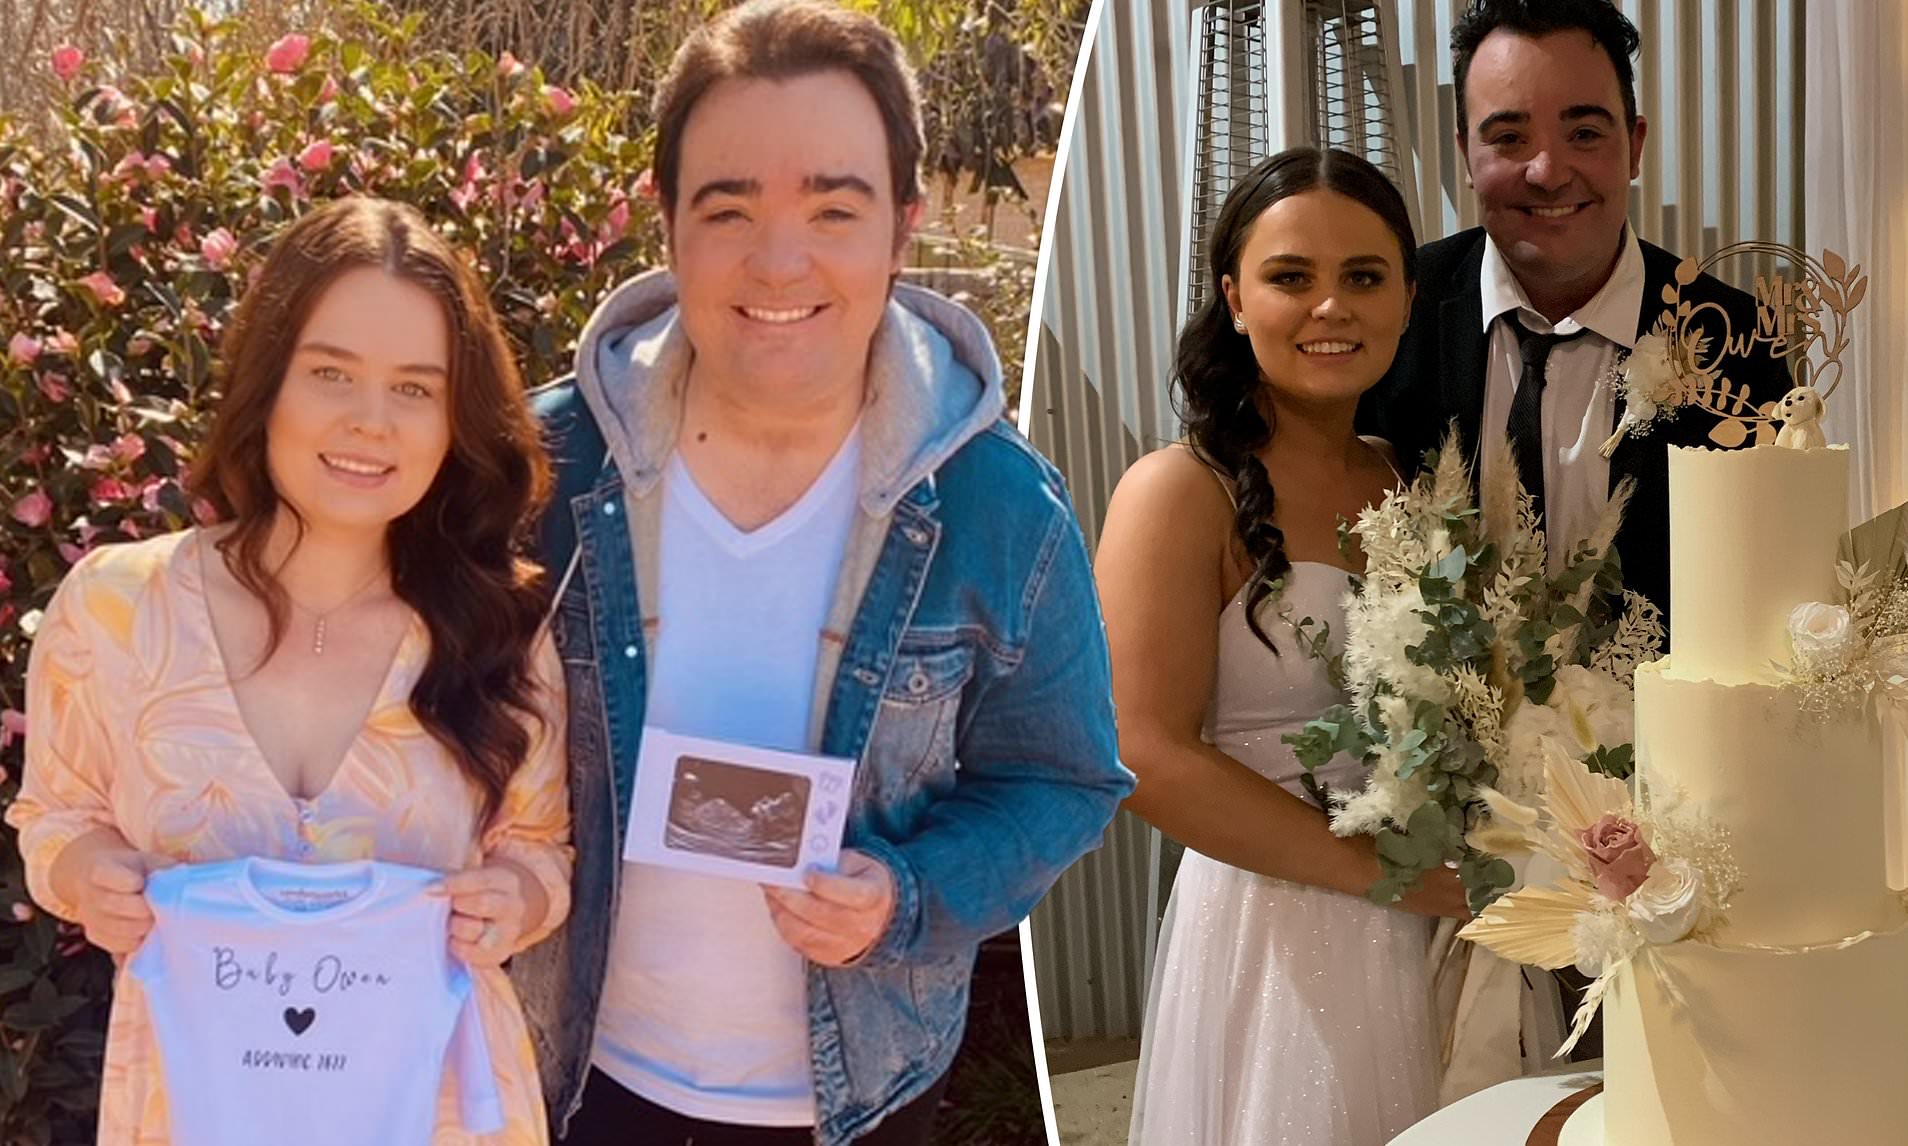 X Factor Australia Star Jason Owen and his new wife share surprise Baby News!